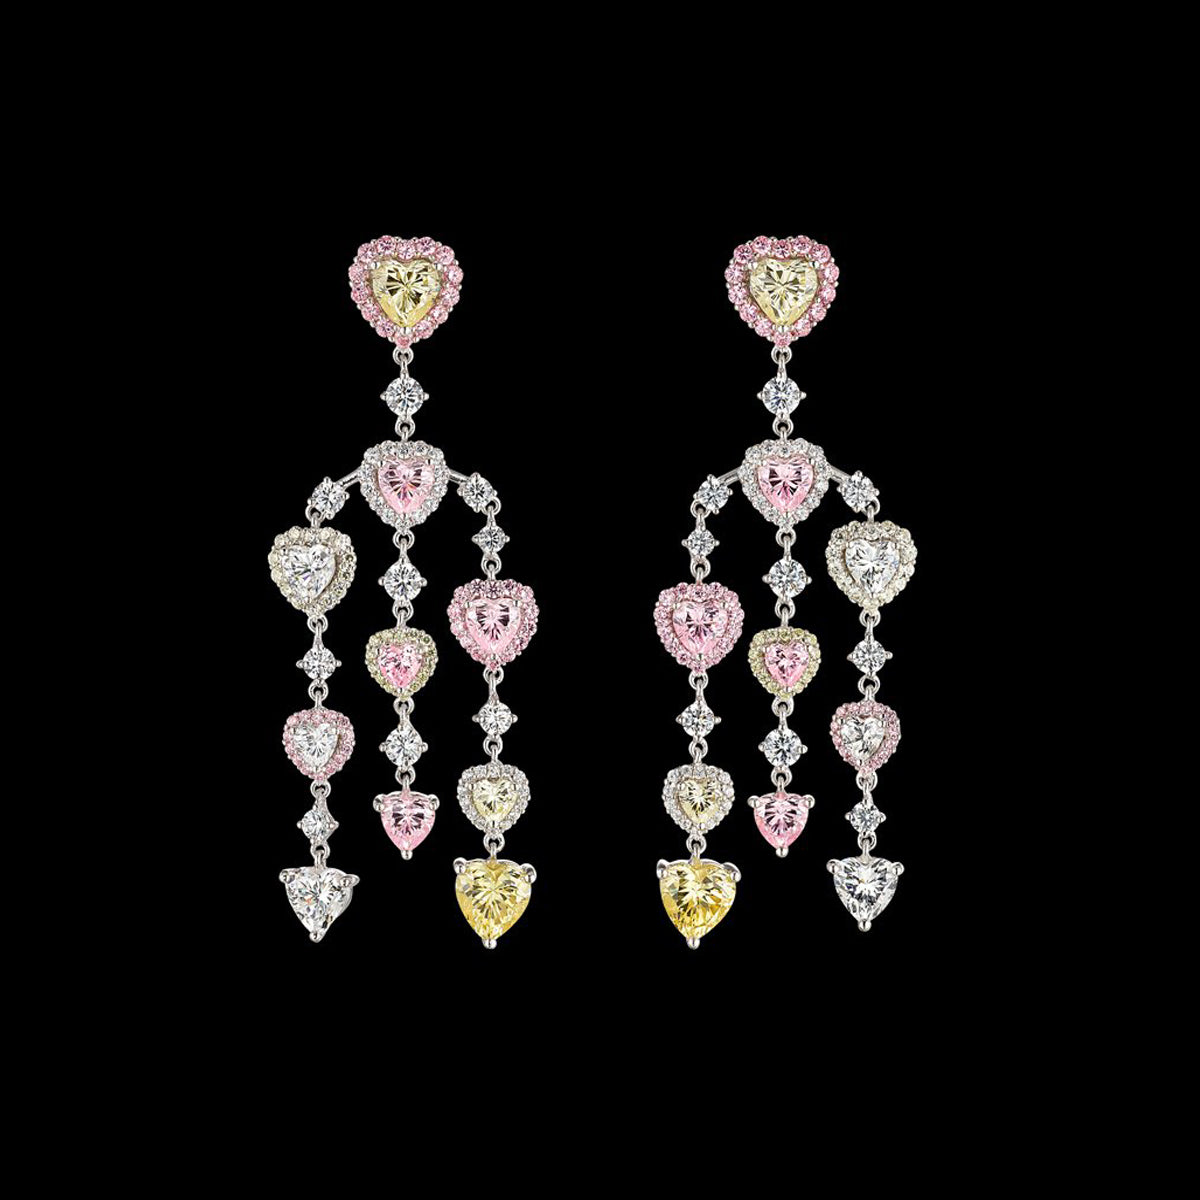 Love Heart Chandelier Earrings, Earring, Anabela Chan Joaillerie - Fine jewelry with laboratory grown and created gemstones hand-crafted in the United Kingdom. Anabela Chan Joaillerie is the first fine jewellery brand in the world to champion laboratory-grown and created gemstones with high jewellery design, artisanal craftsmanship and a focus on ethical and sustainable innovations.